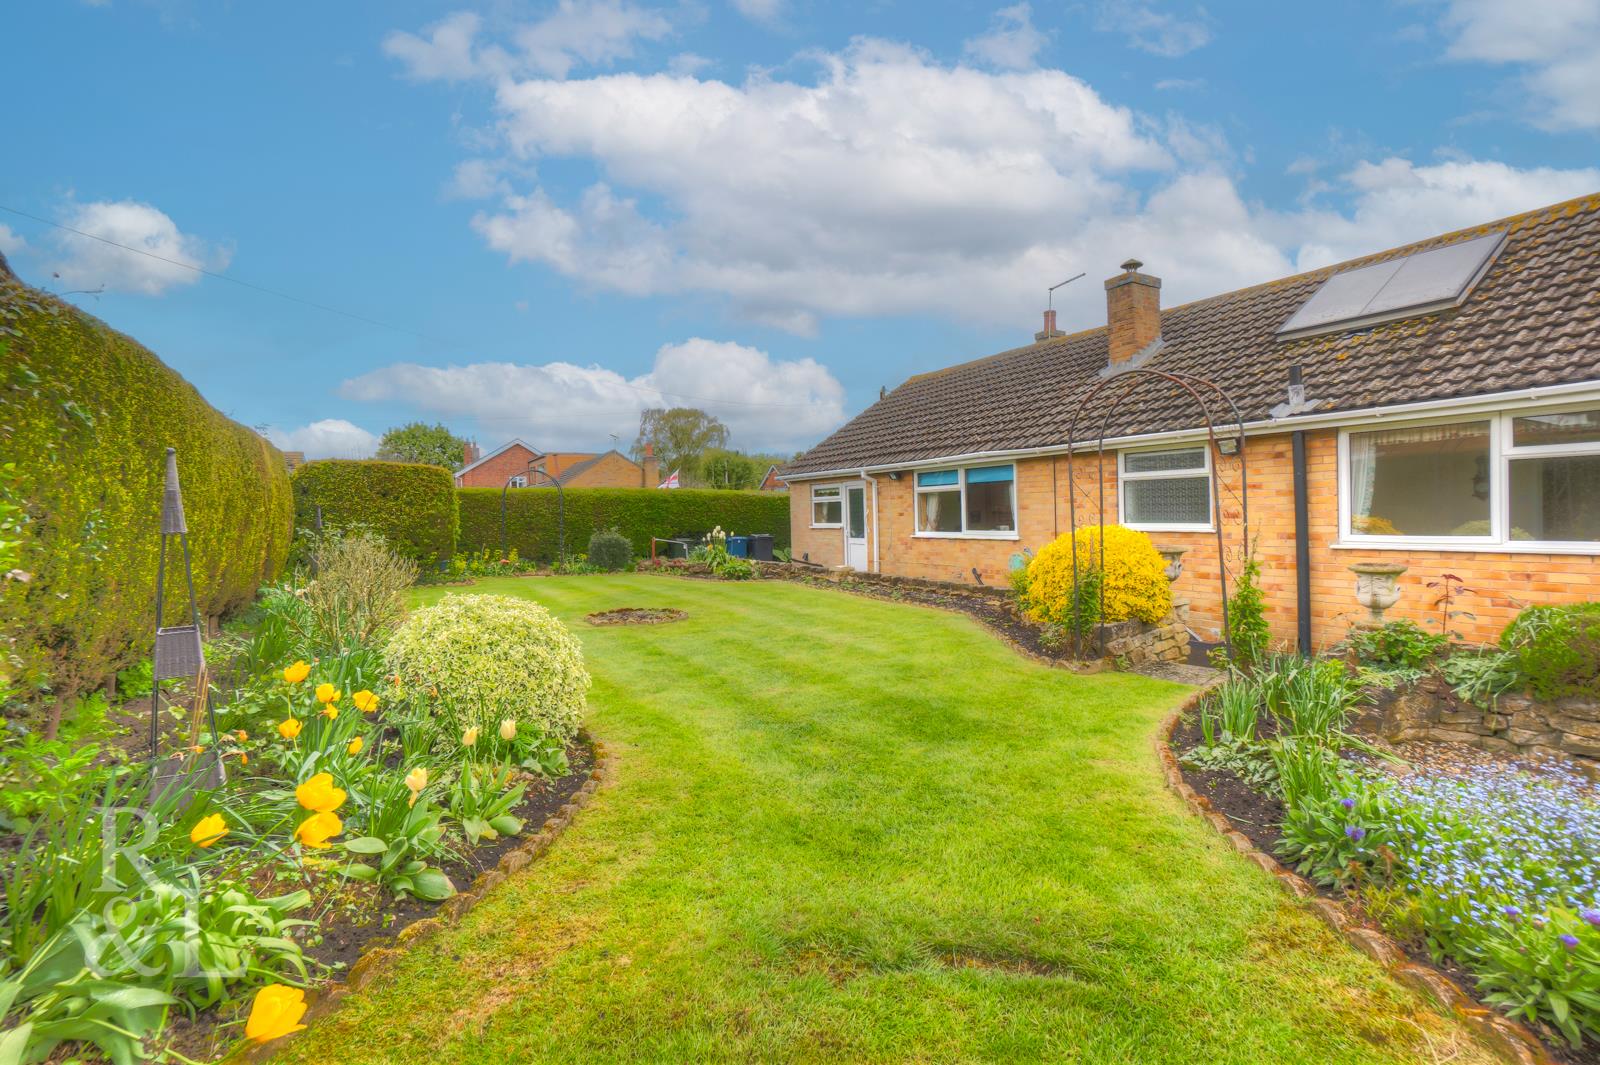 Property image for Harles Acres, Hickling, Melton Mowbray